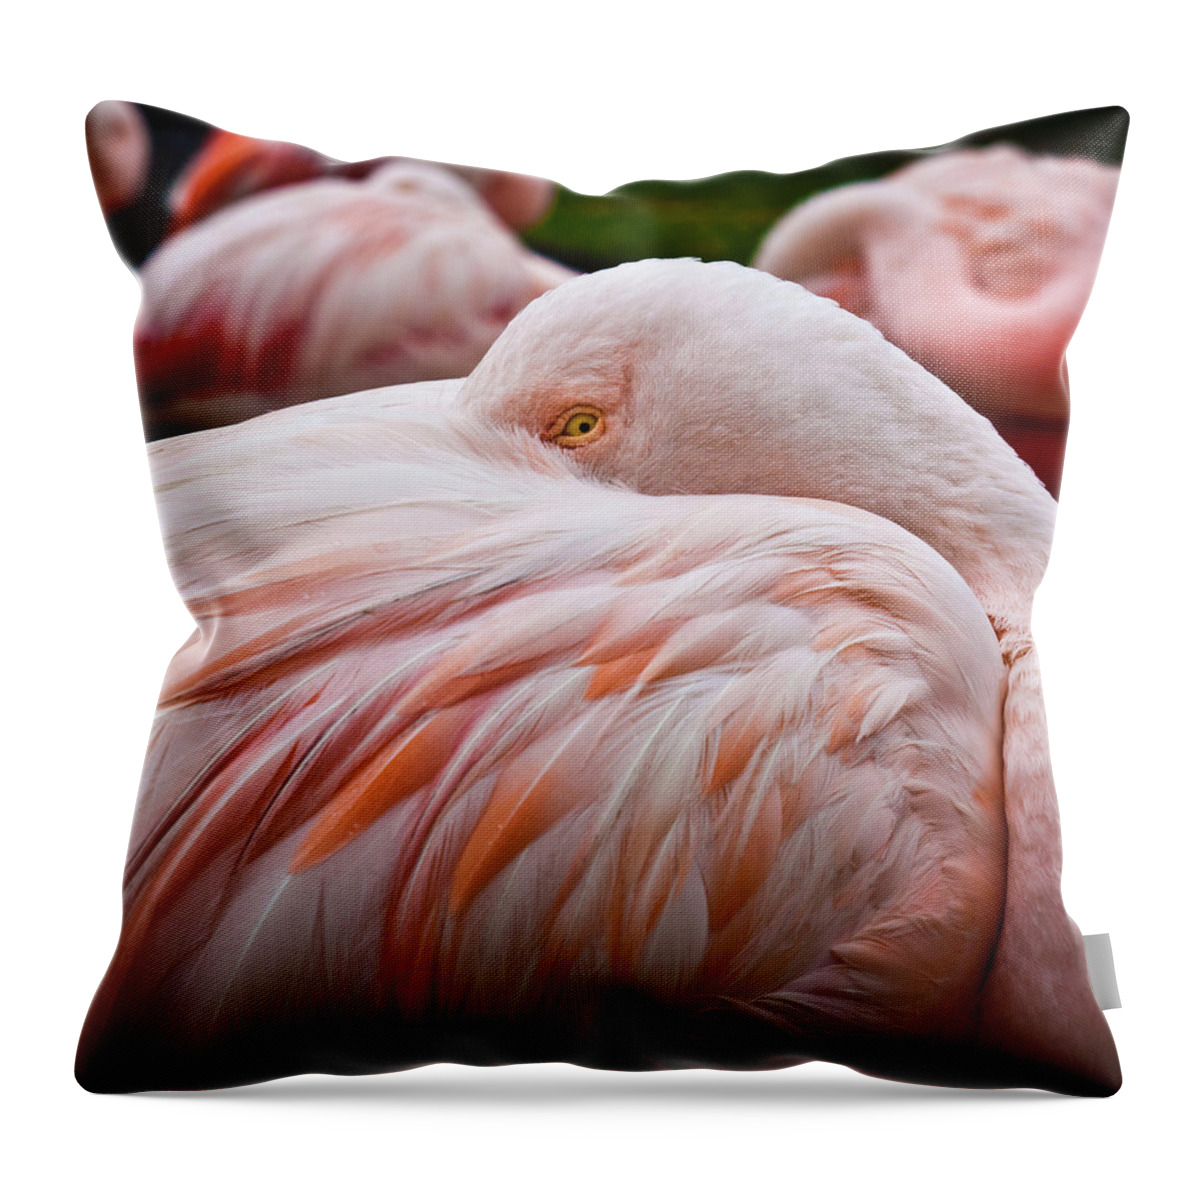 Animal Themes Throw Pillow featuring the photograph Peeping by Daqiao Photography